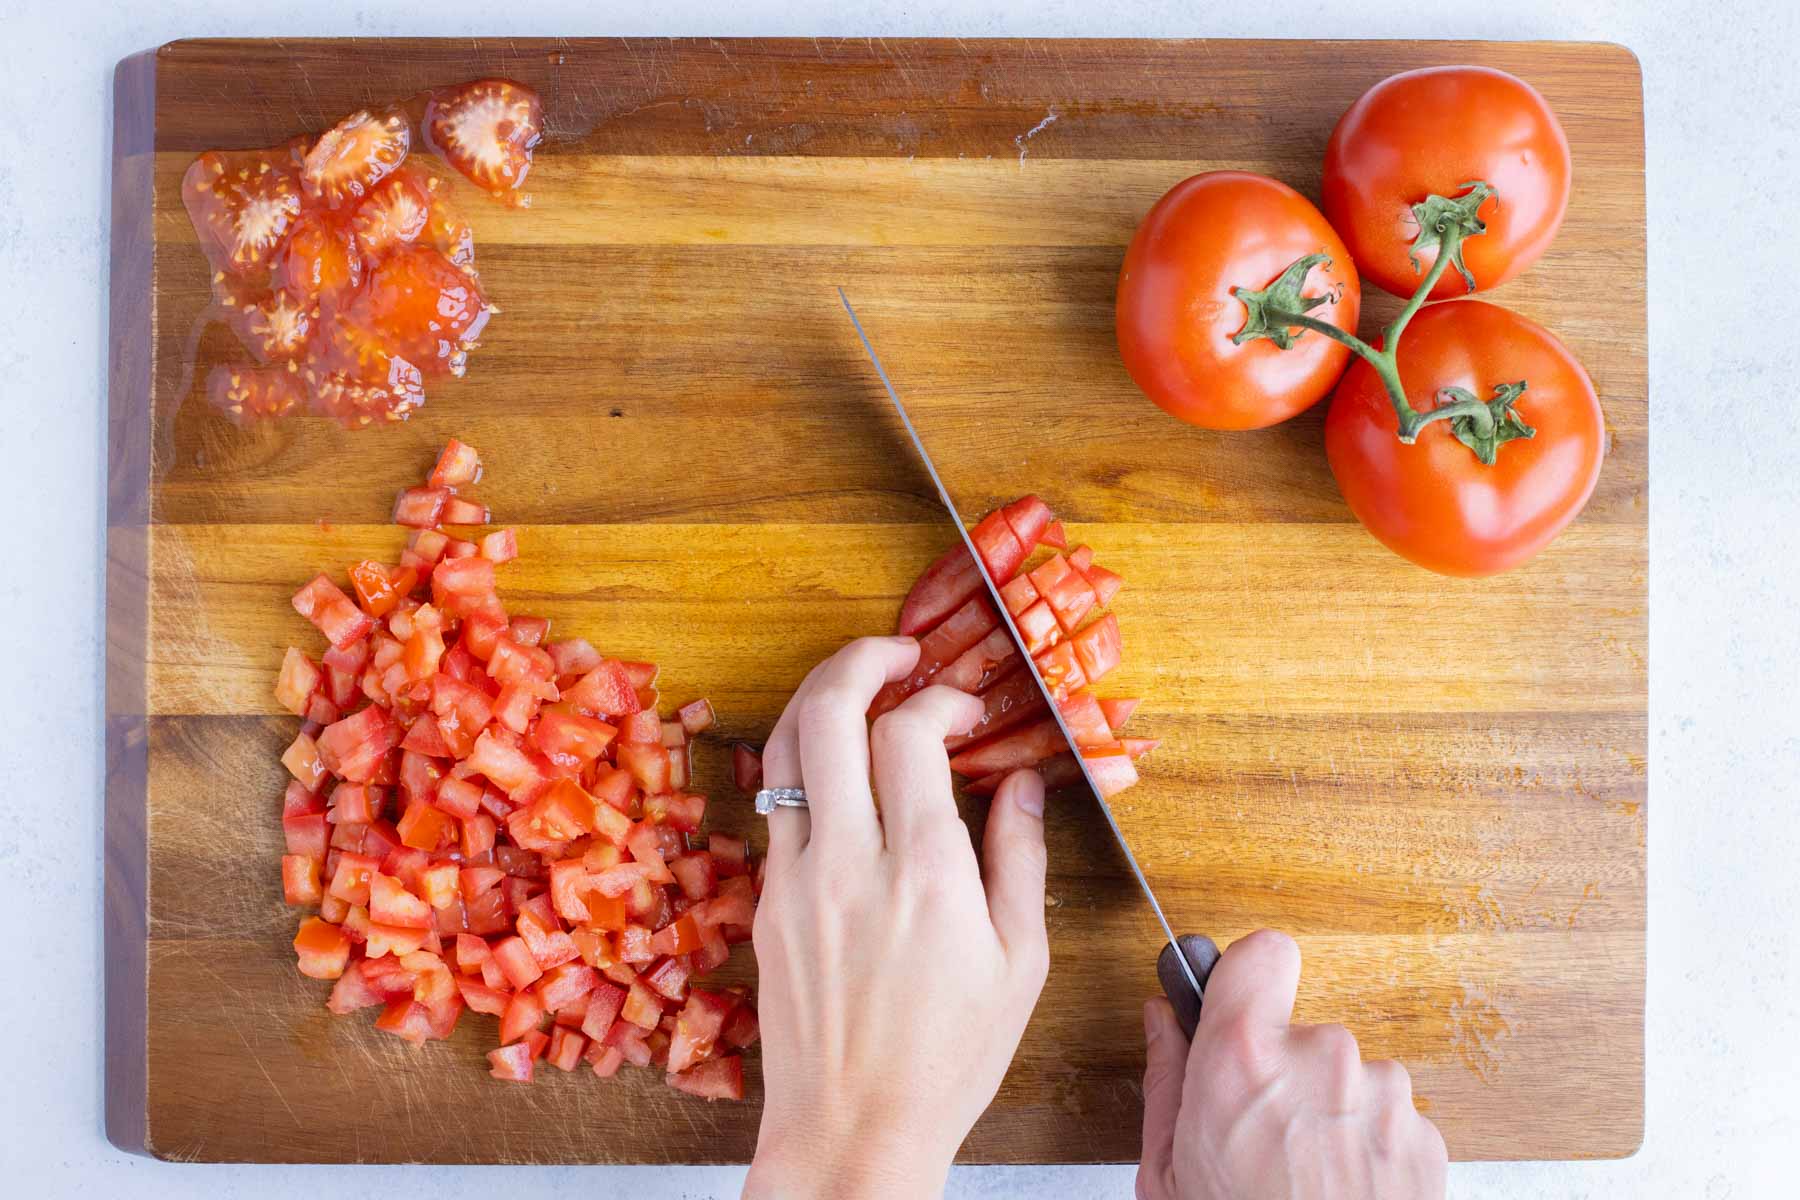 A sharp knife is used to cut the tomatoes into even sizes.